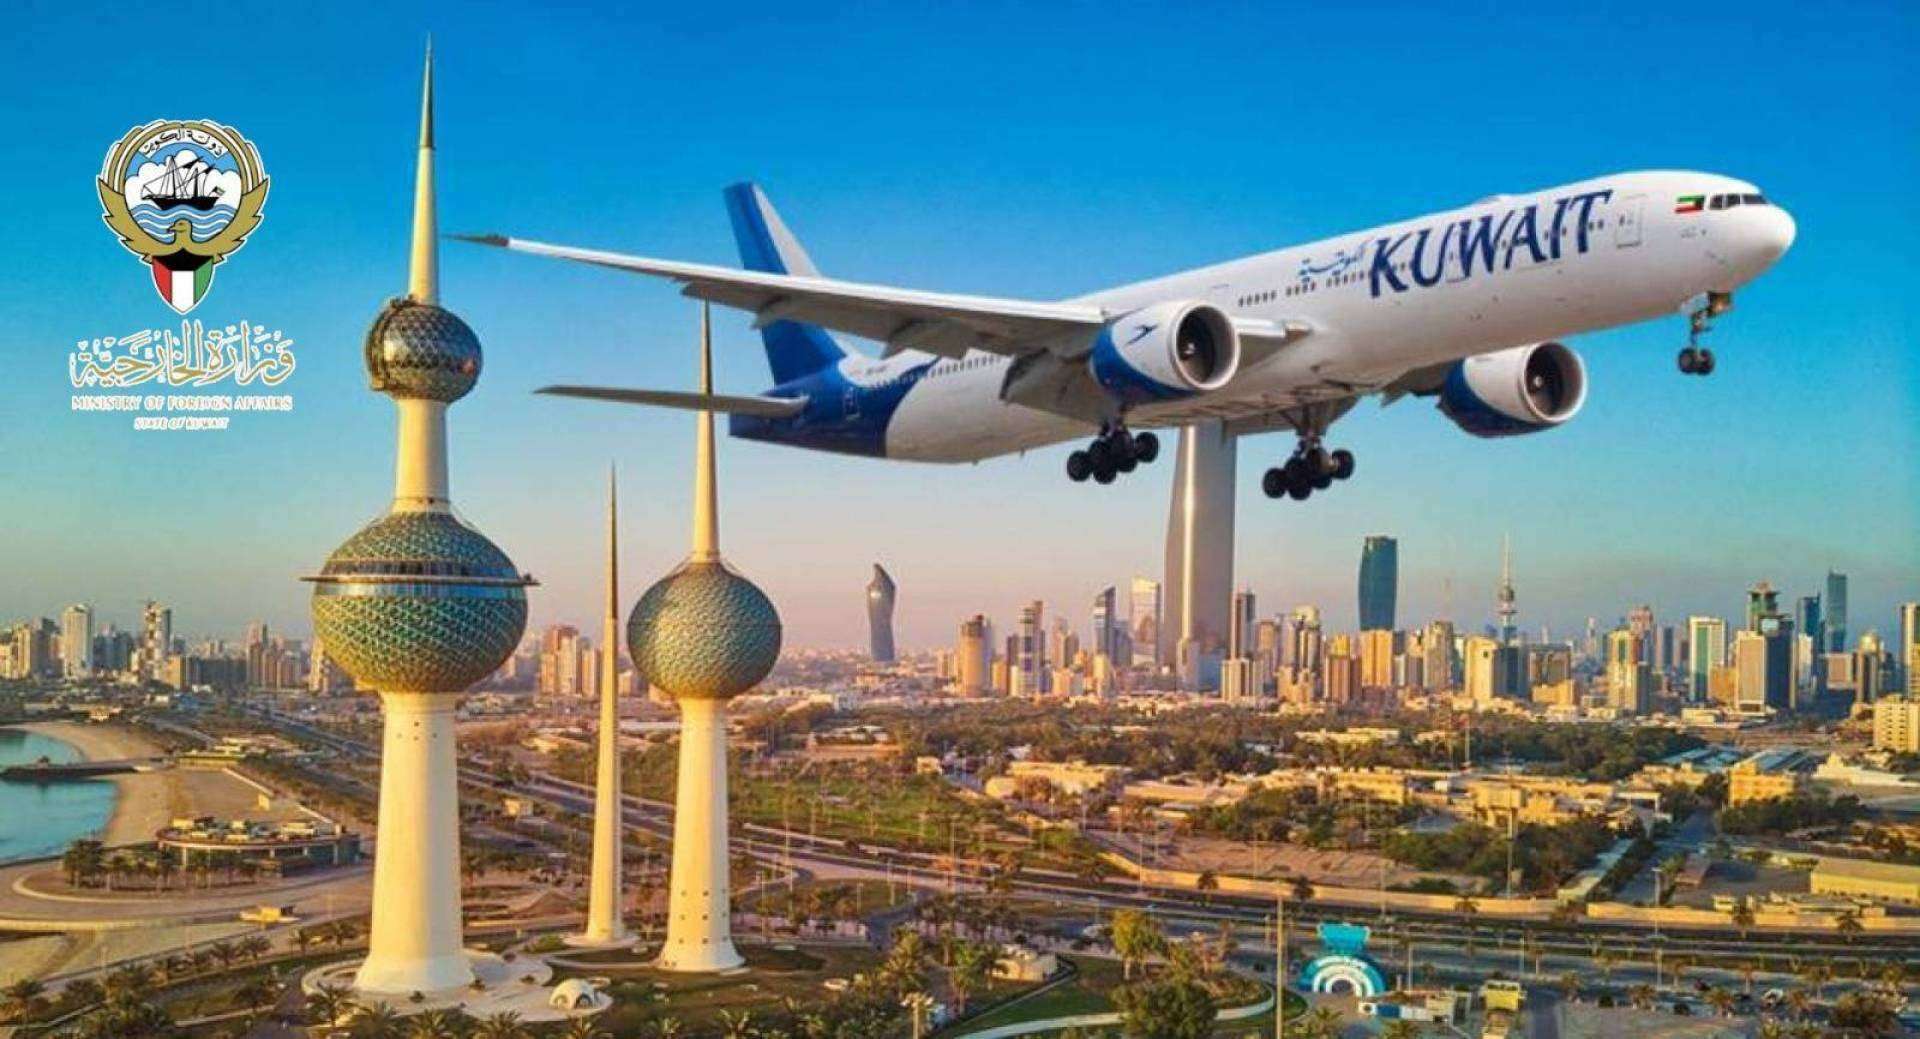 the-ministry-of-foreign-affairs-warns-citizens-do-not-travel-to-countries-affected-by-corona-for-the-sake-of-tourism_kuwait